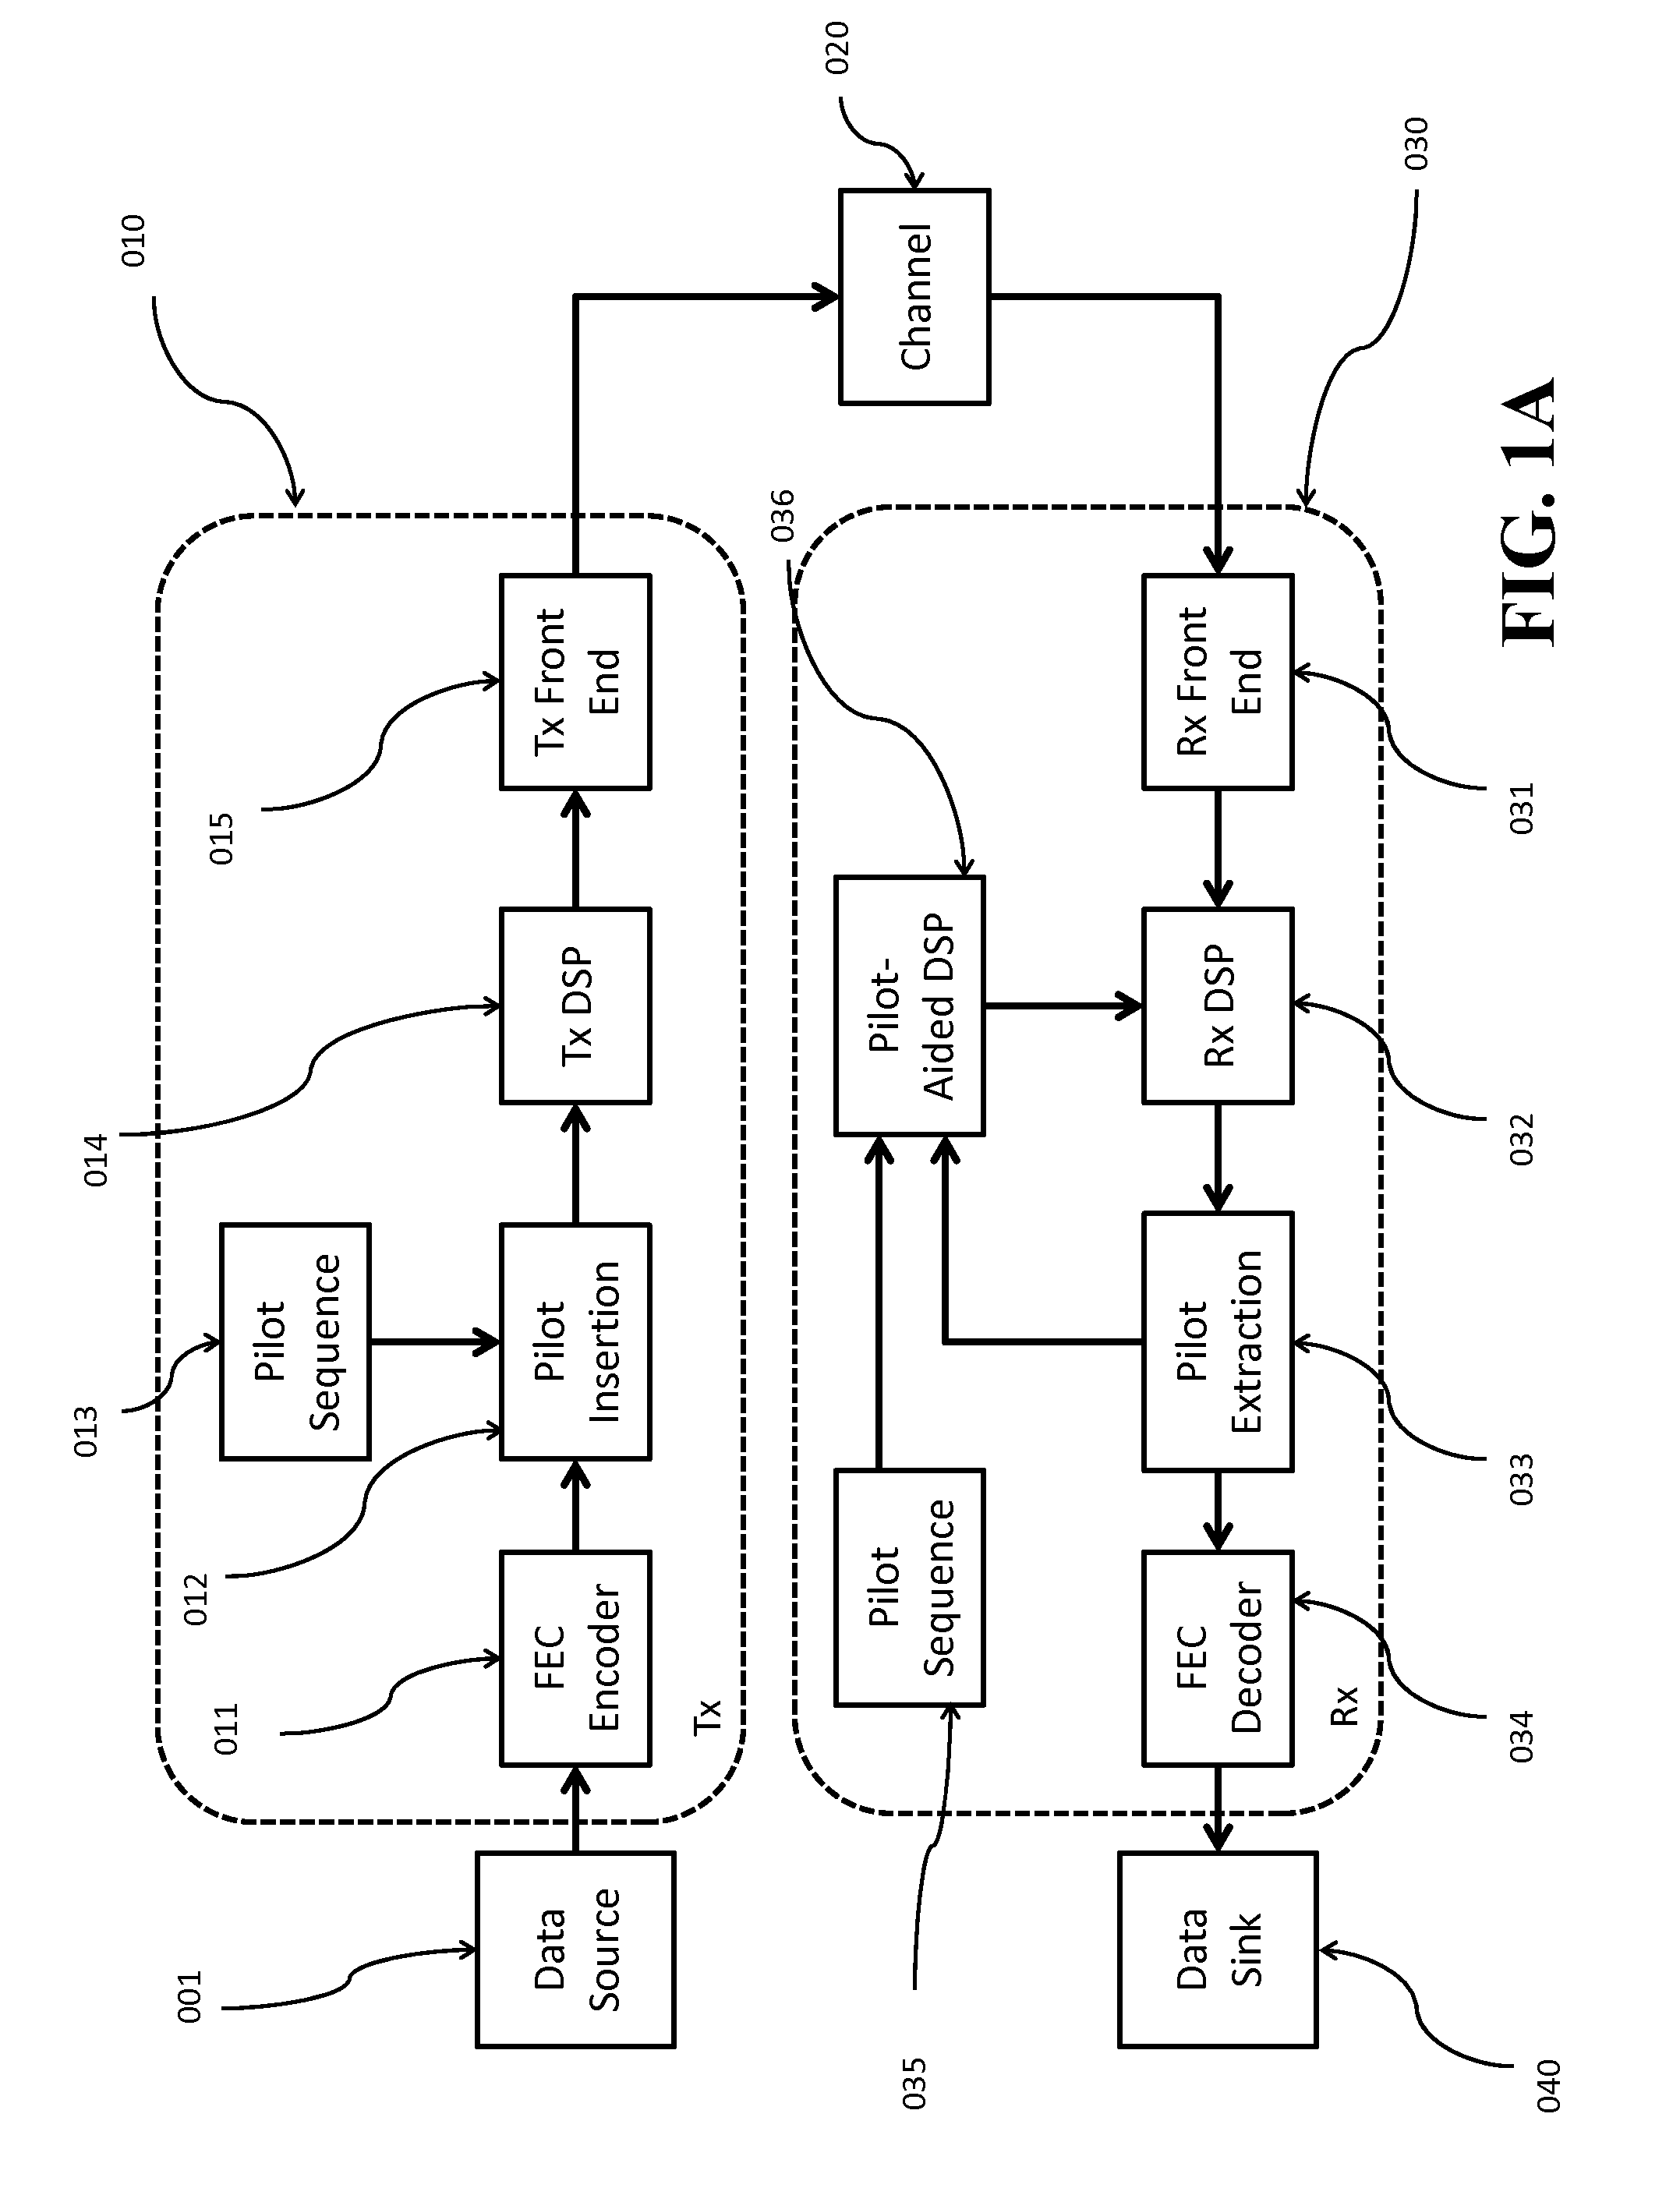 Pilot-Aided Coherent Receiver for Optical Communications